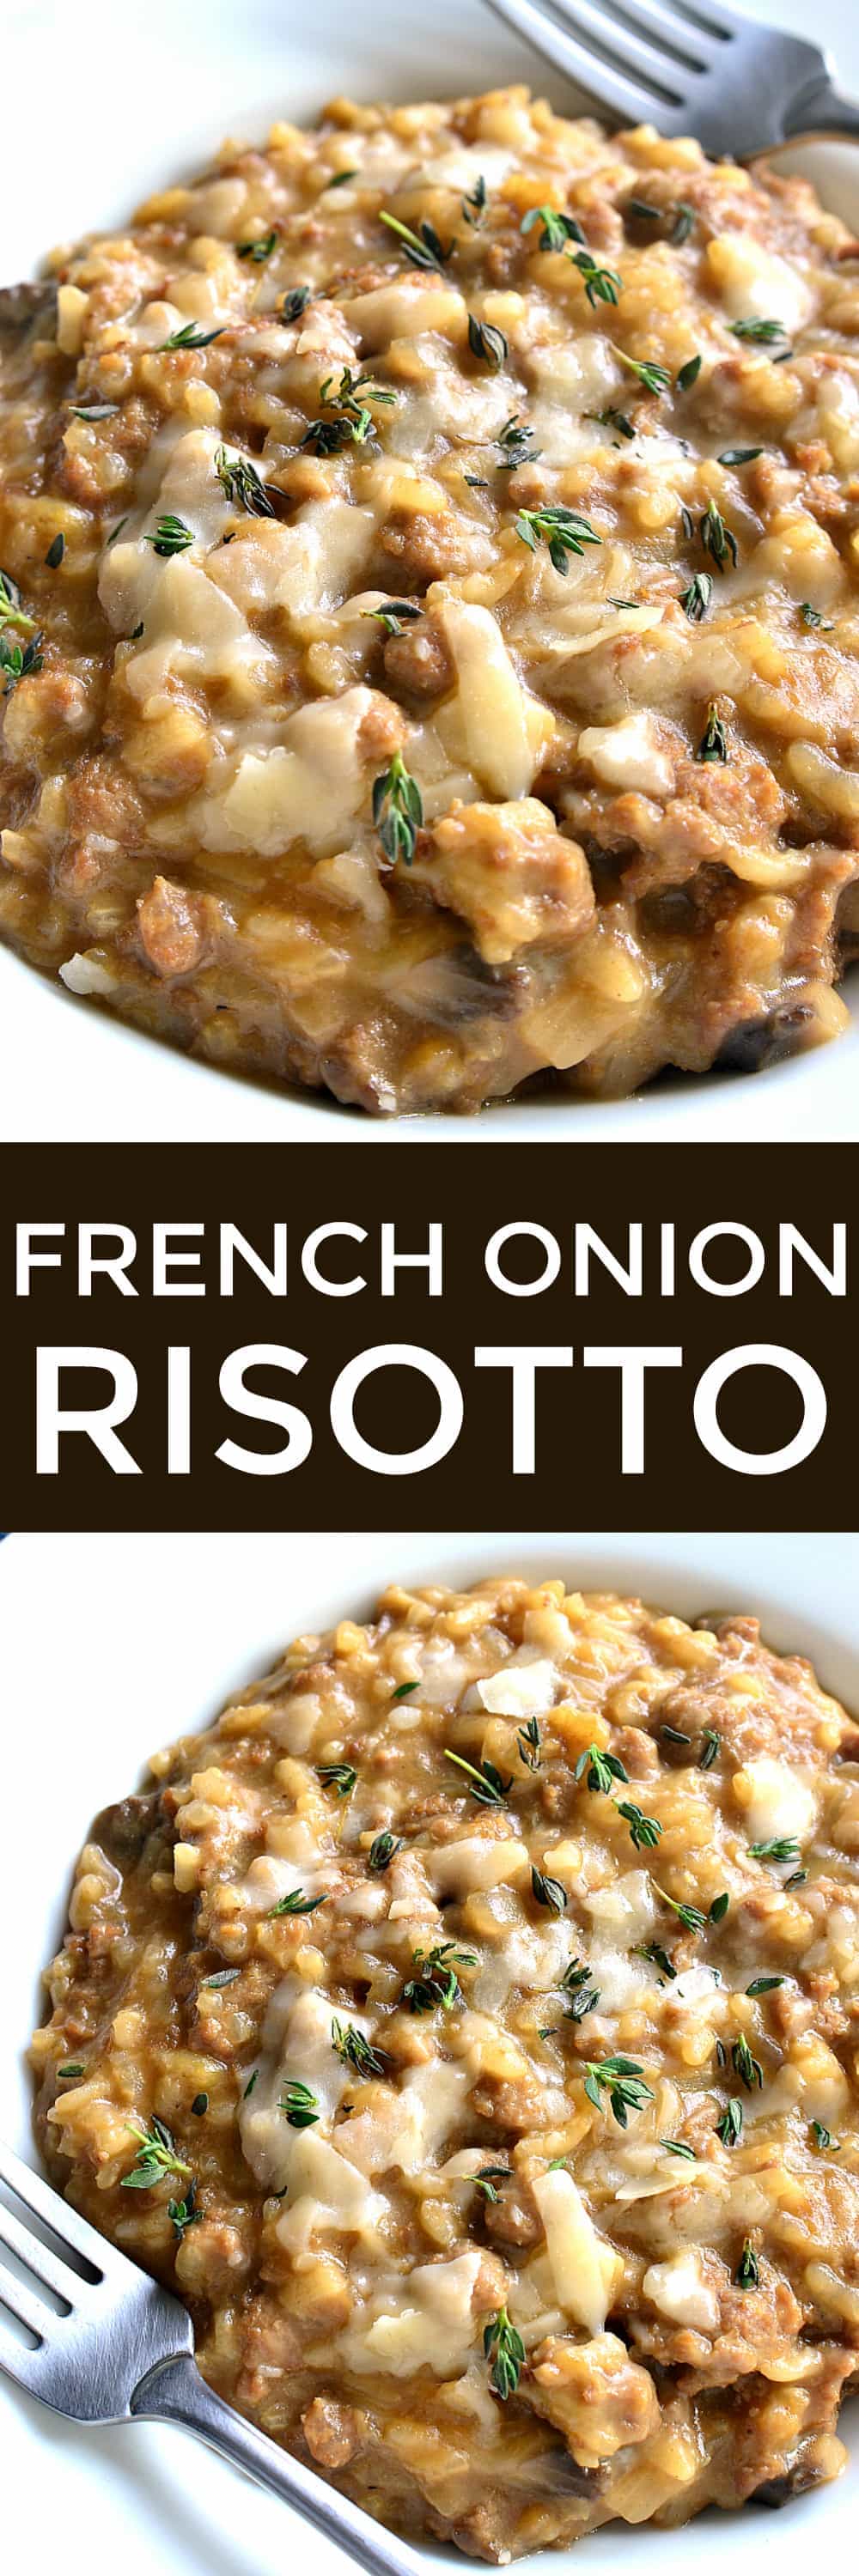 This French Onion Risotto is creamy, comforting, and bursting with French Onion flavor! Perfect for date night or anytime you want to impress....and ready in just 30 minutes!